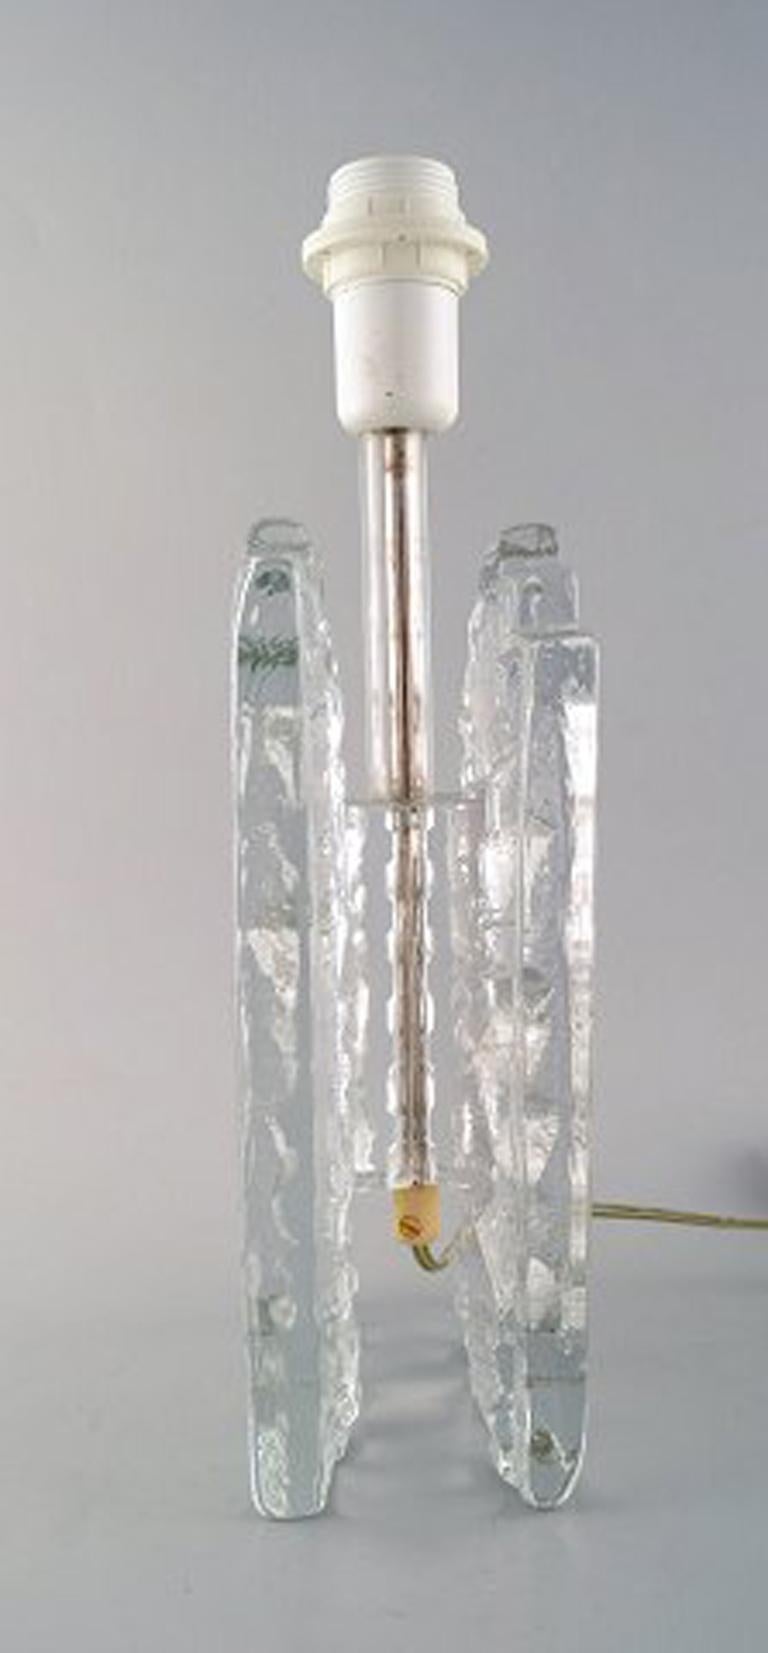 Modernist Pukeberg table lamp in mouth blown art glass.
Swedish design, 1960s.
In very good condition.
Measures: 28 cm high x 9.5 cm. With socket: 38.5 cm high.
Sticker.